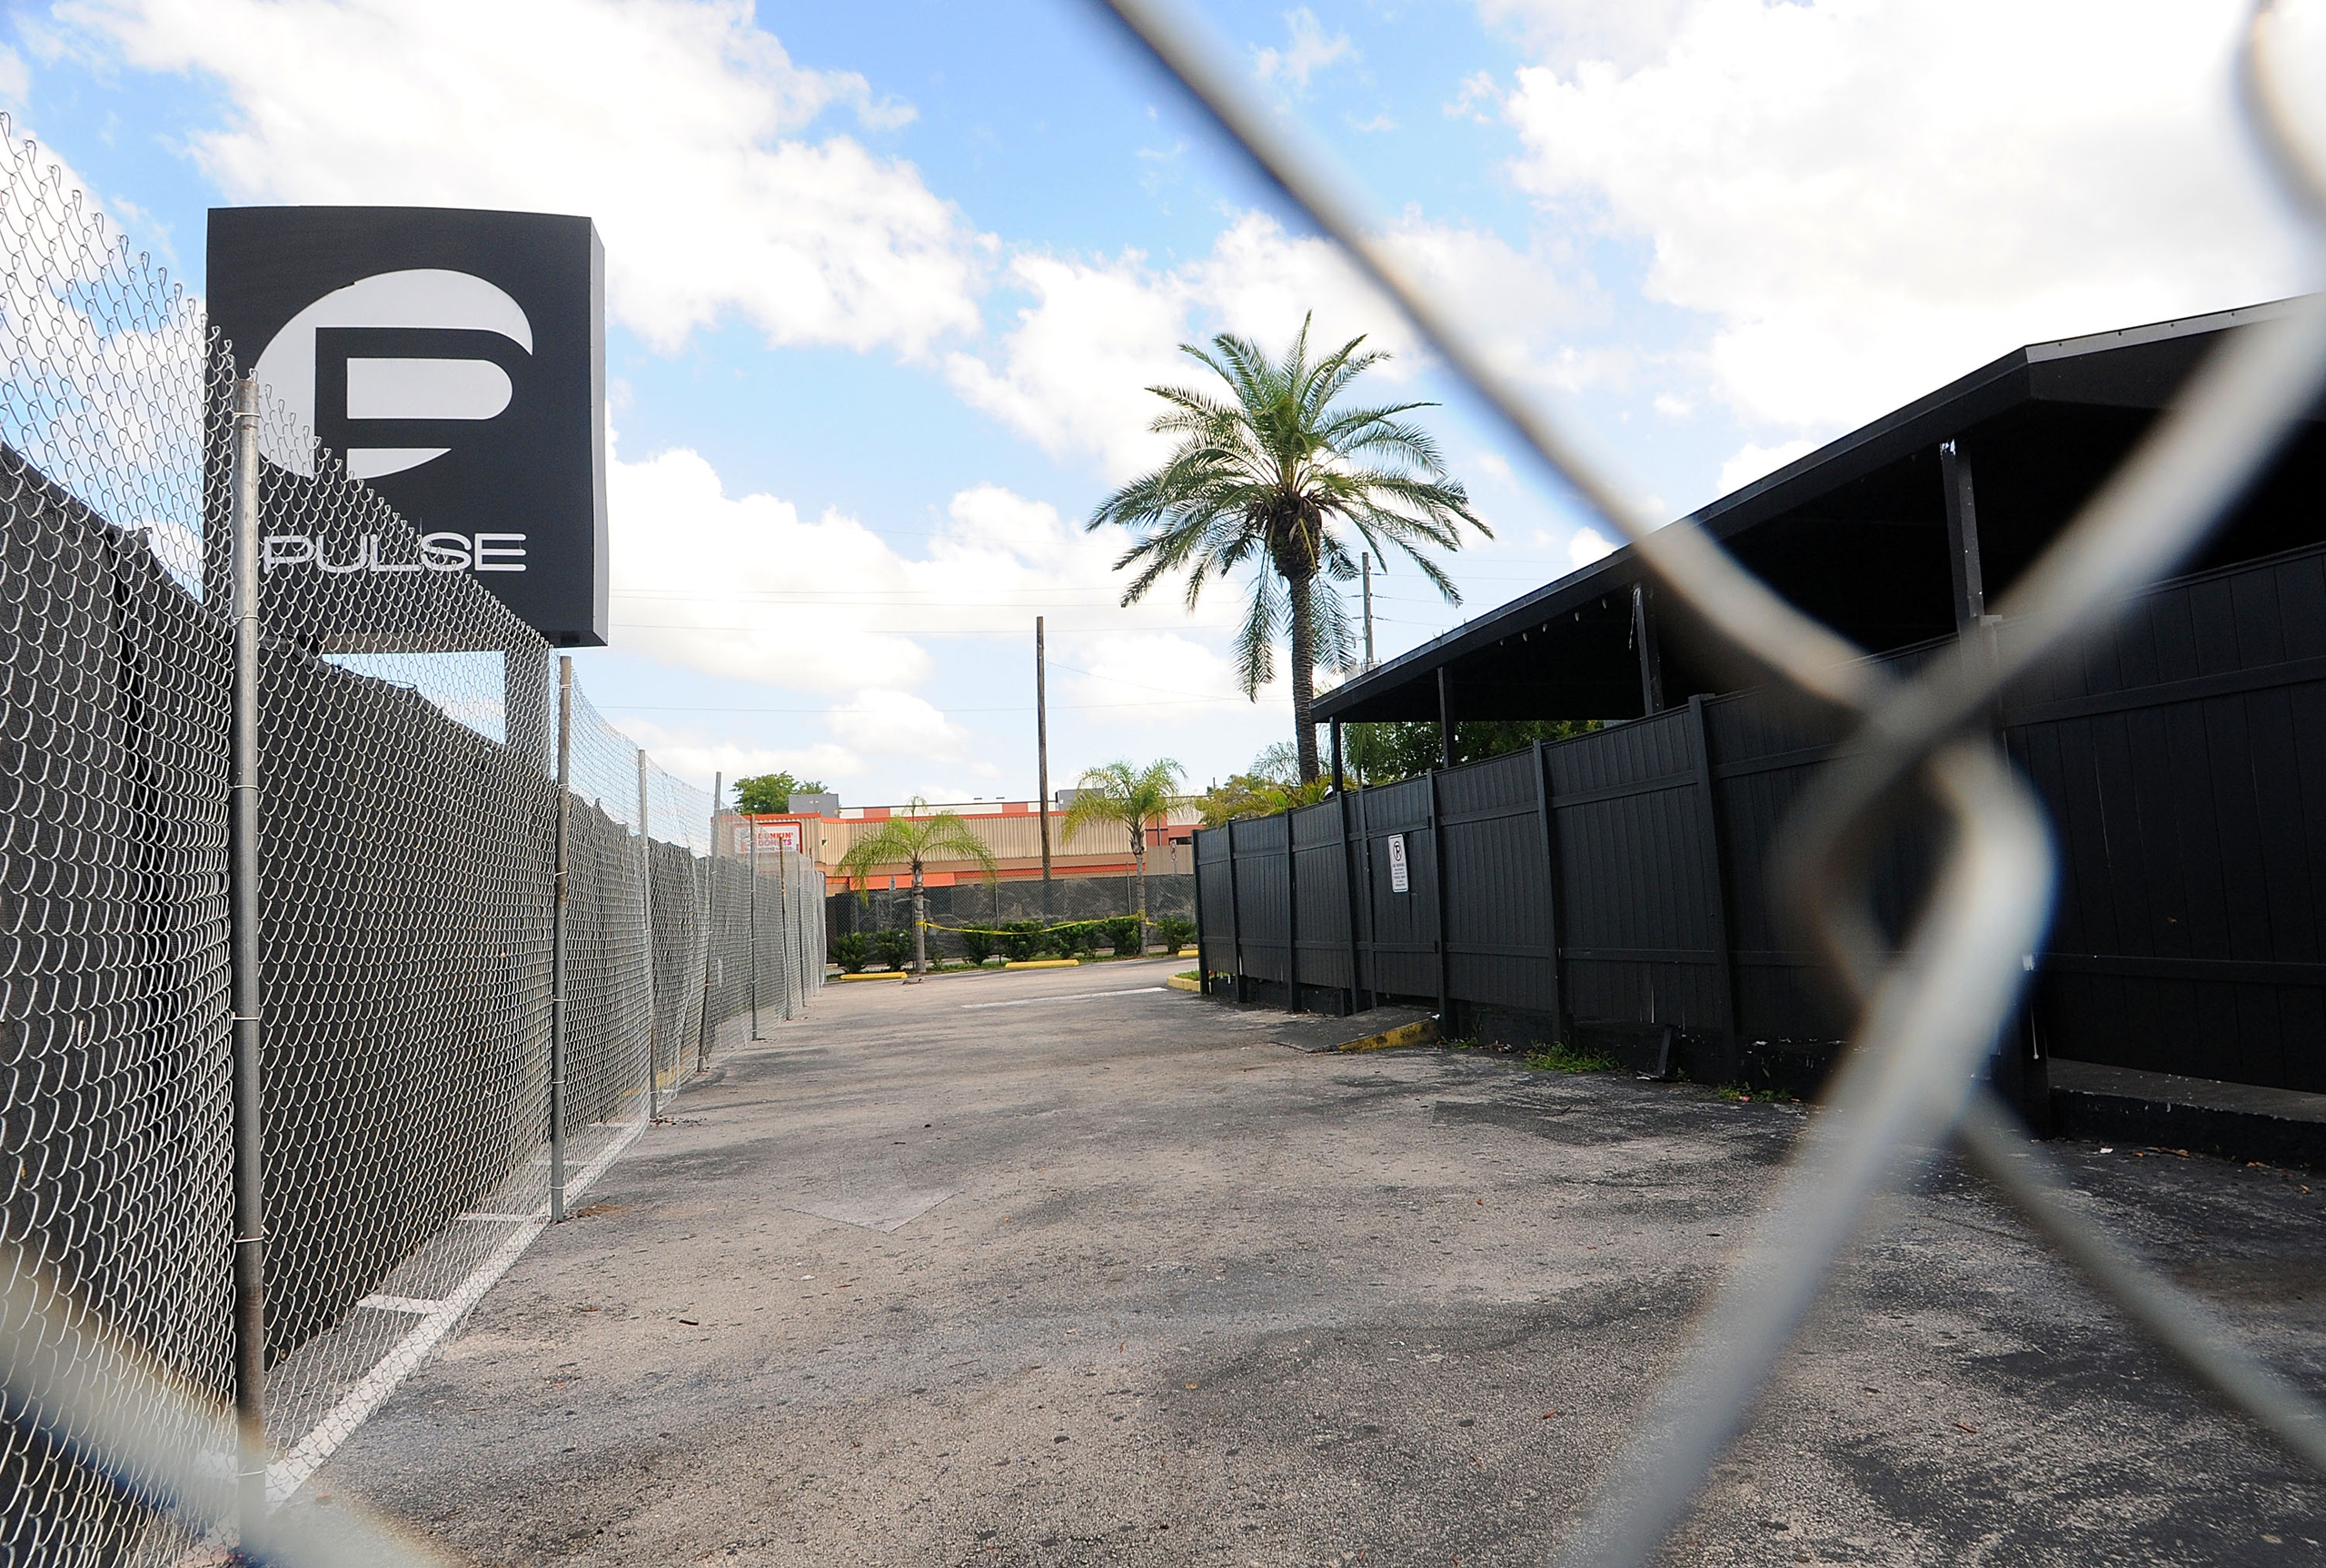 A view of the Pulse nightclub main entrance in Orlando, Florida, on June 21, 2016. (Gerardo Mora—Getty Images)